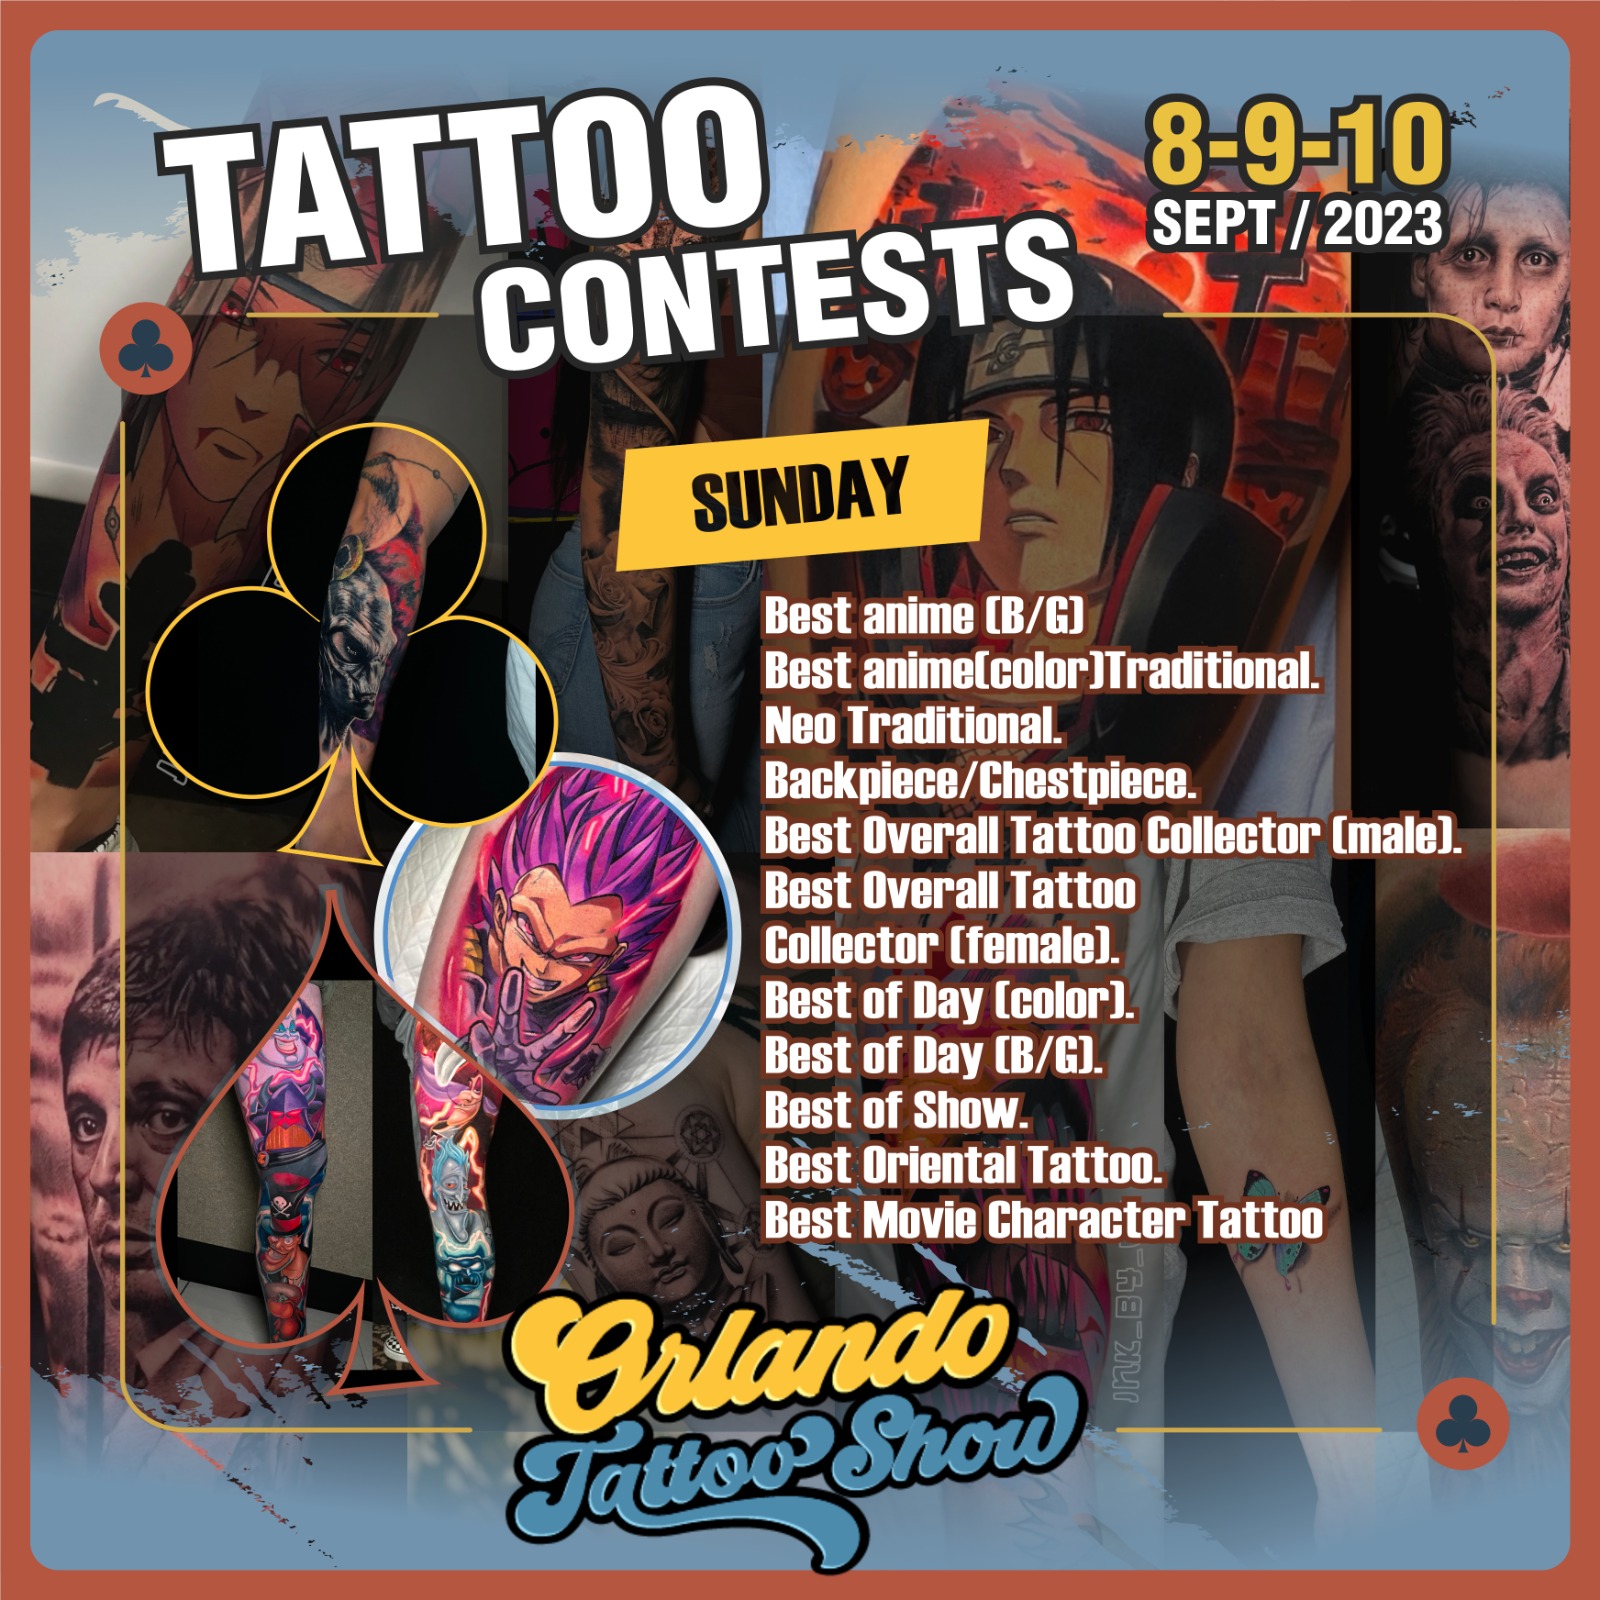 Stories behind tattoos at annual Jacksonville convention